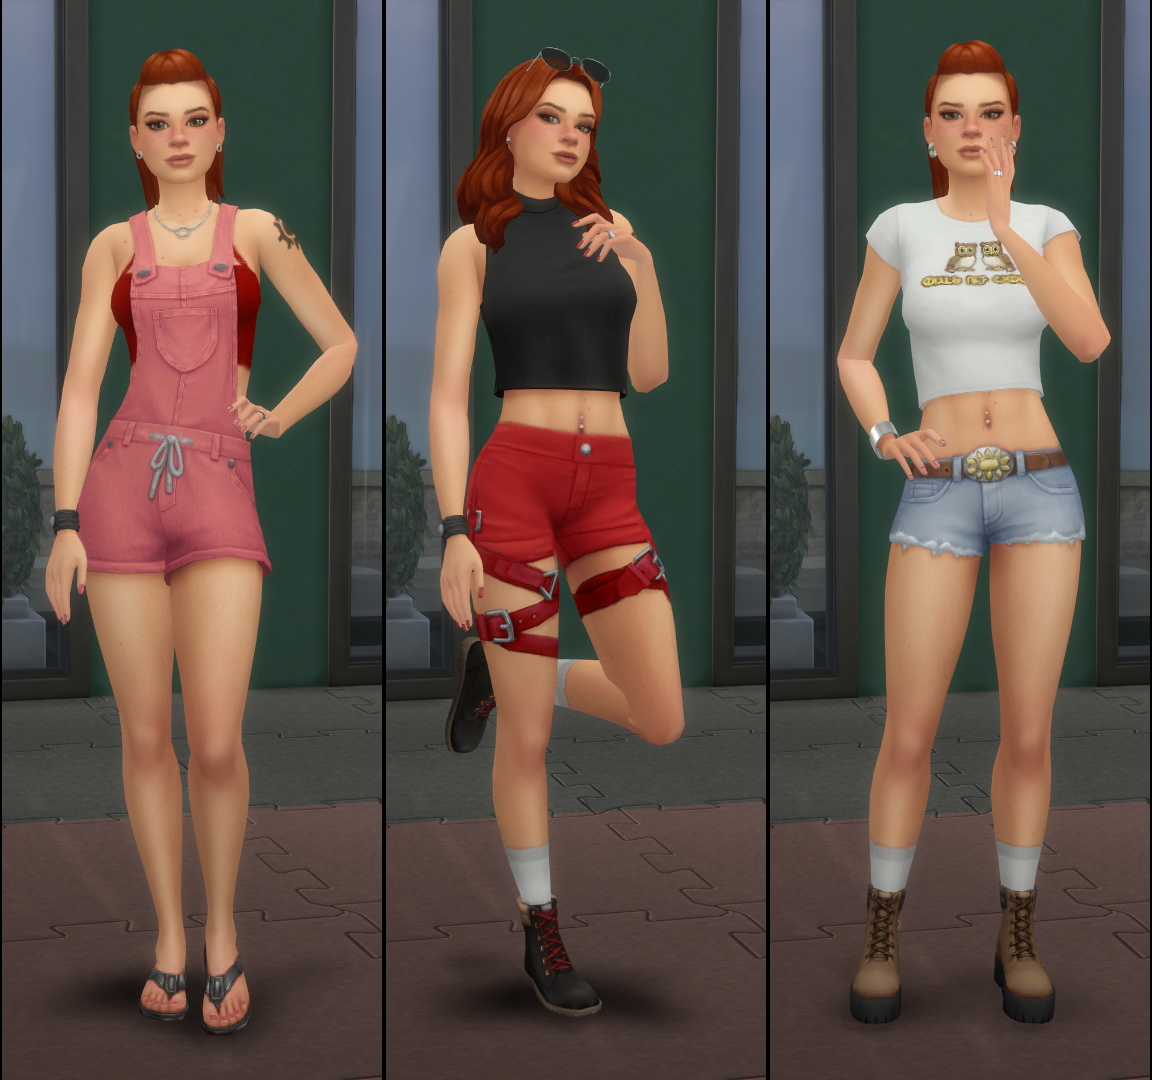 1054363552_Outfits-HotWeather.png.c794ed669421856bb19a40e1efdc05c0.png